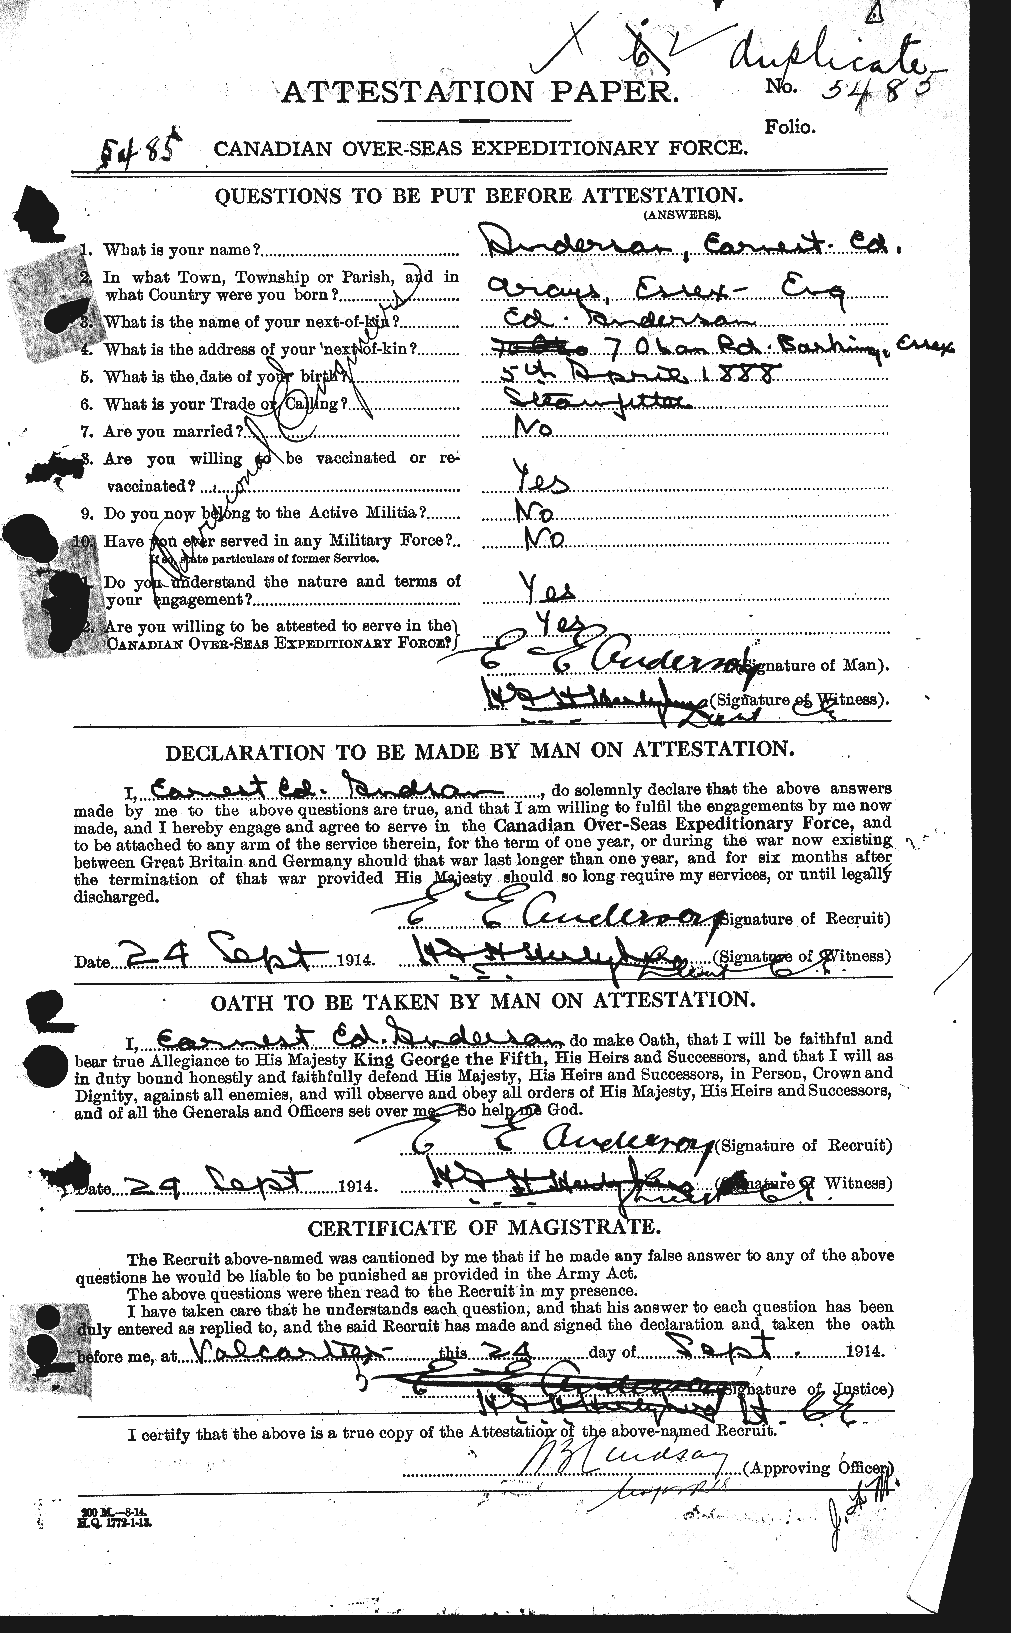 Personnel Records of the First World War - CEF 209887a